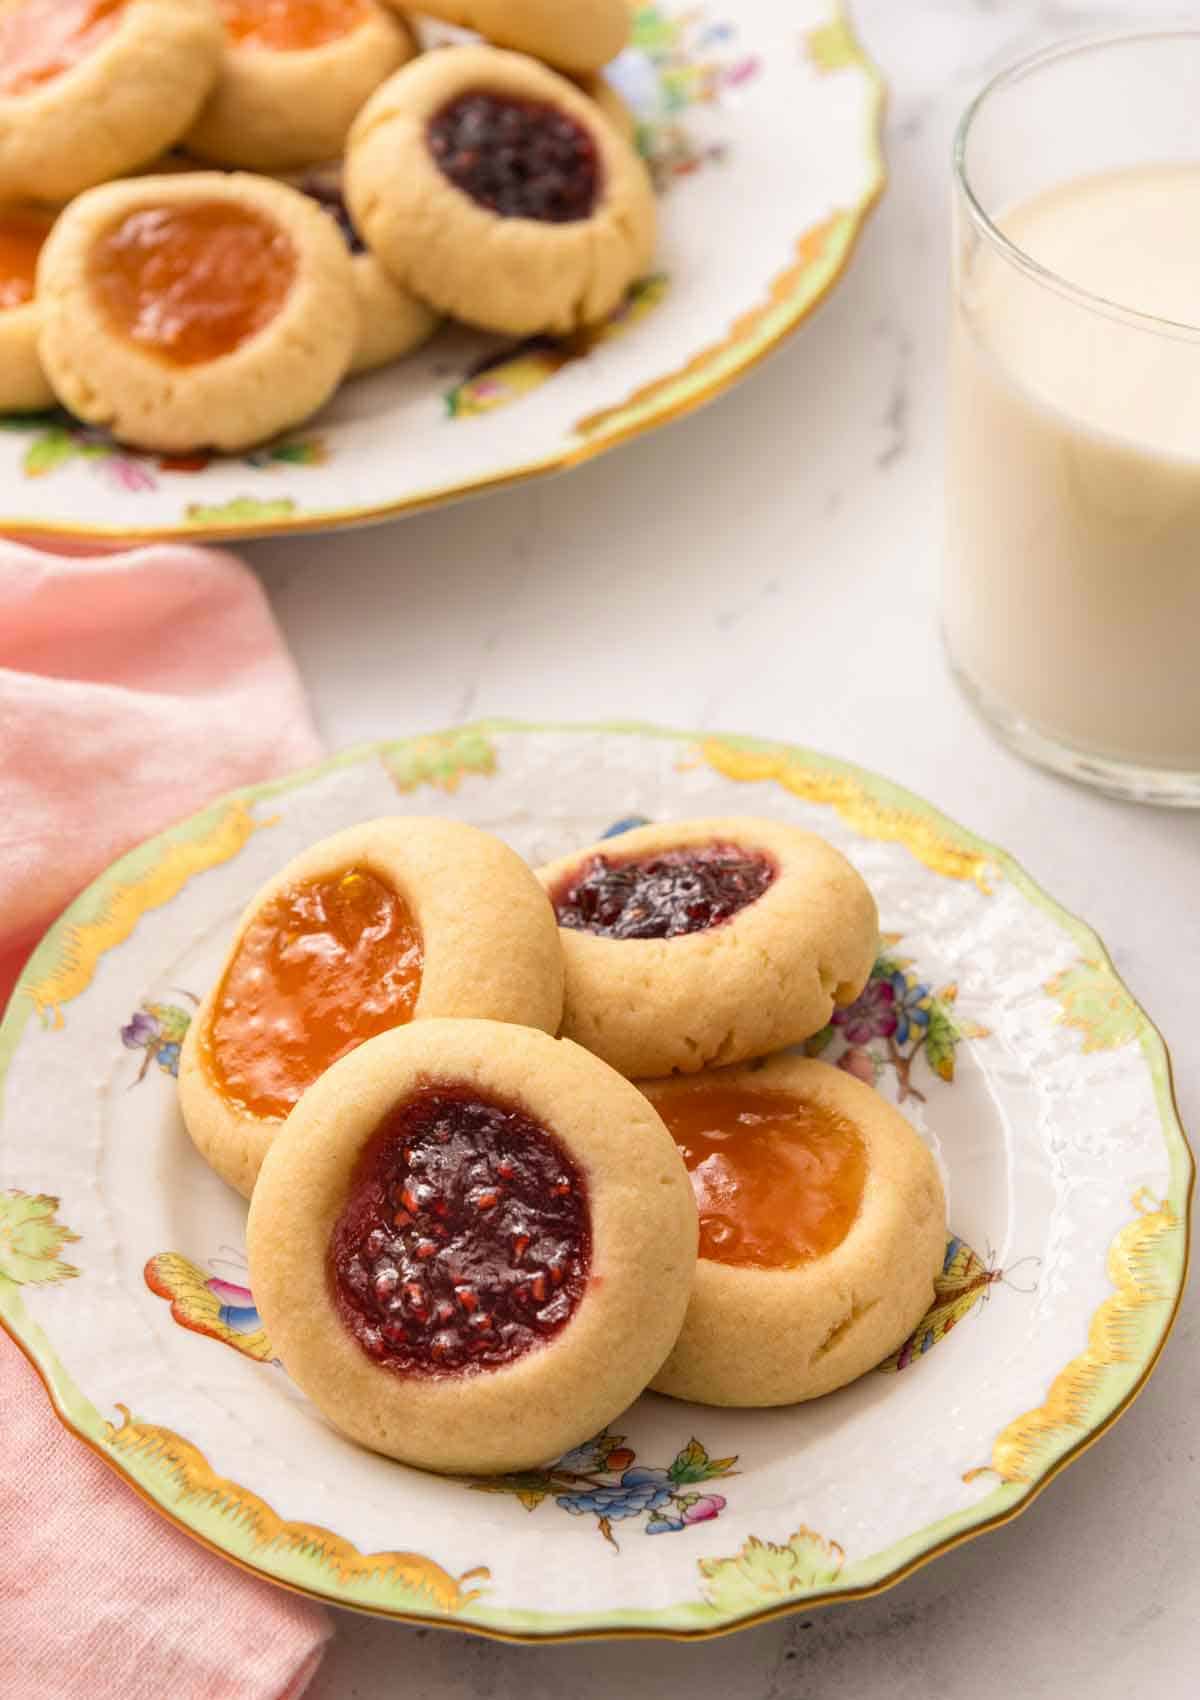 A plate with four thumbprint cookies with a glass of milk and nothing plate of cookies in the back.